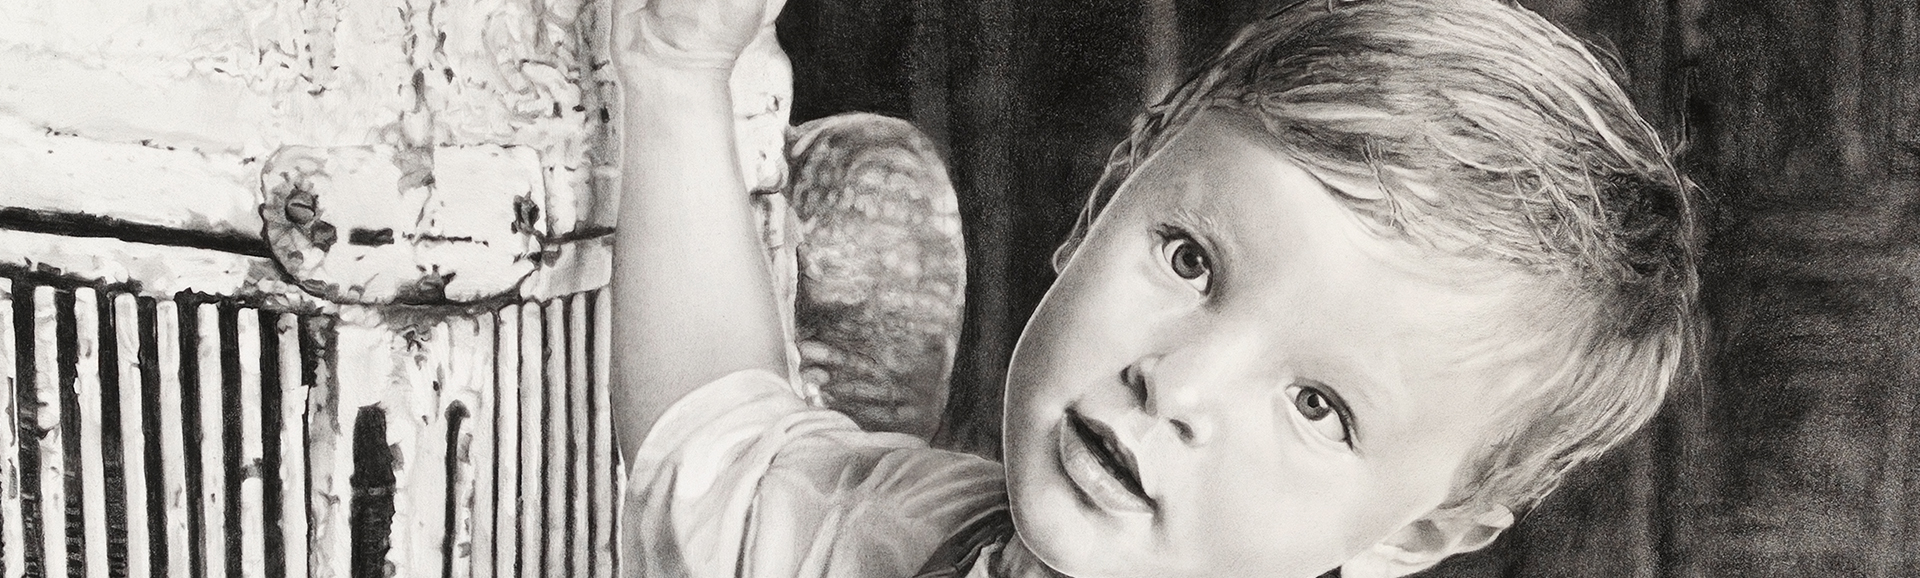 Graphite drawing of “Stephan” a young Caucasian boy in a white tee shirt and jean overalls next to a paint peeled automobile.